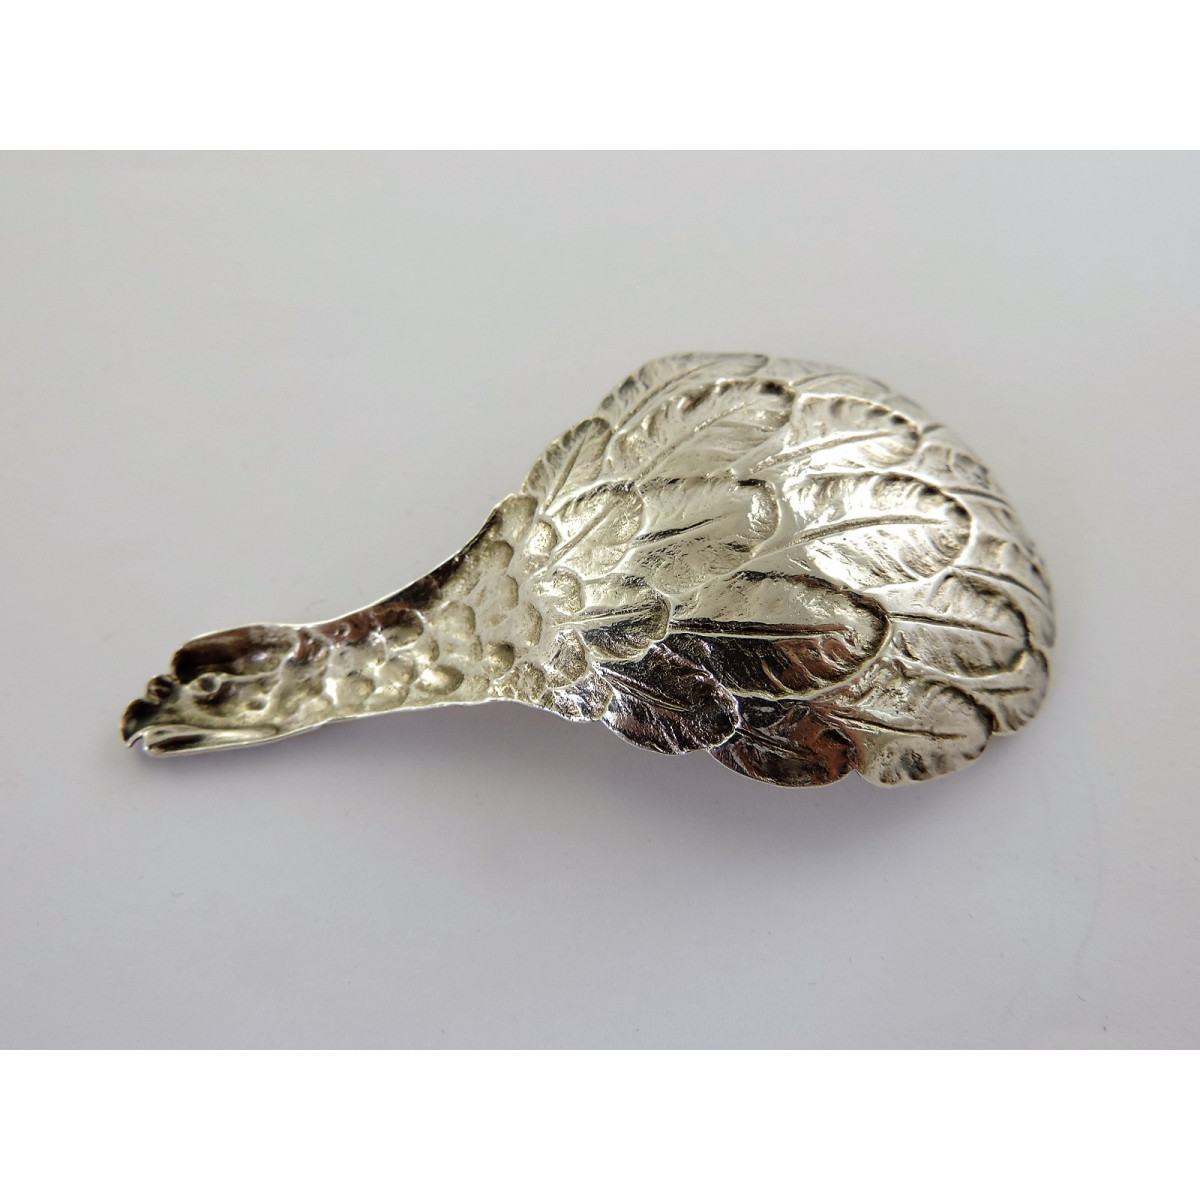 Eagle's Wing Caddy Spoon, 1832 » Antique Silver Spoons